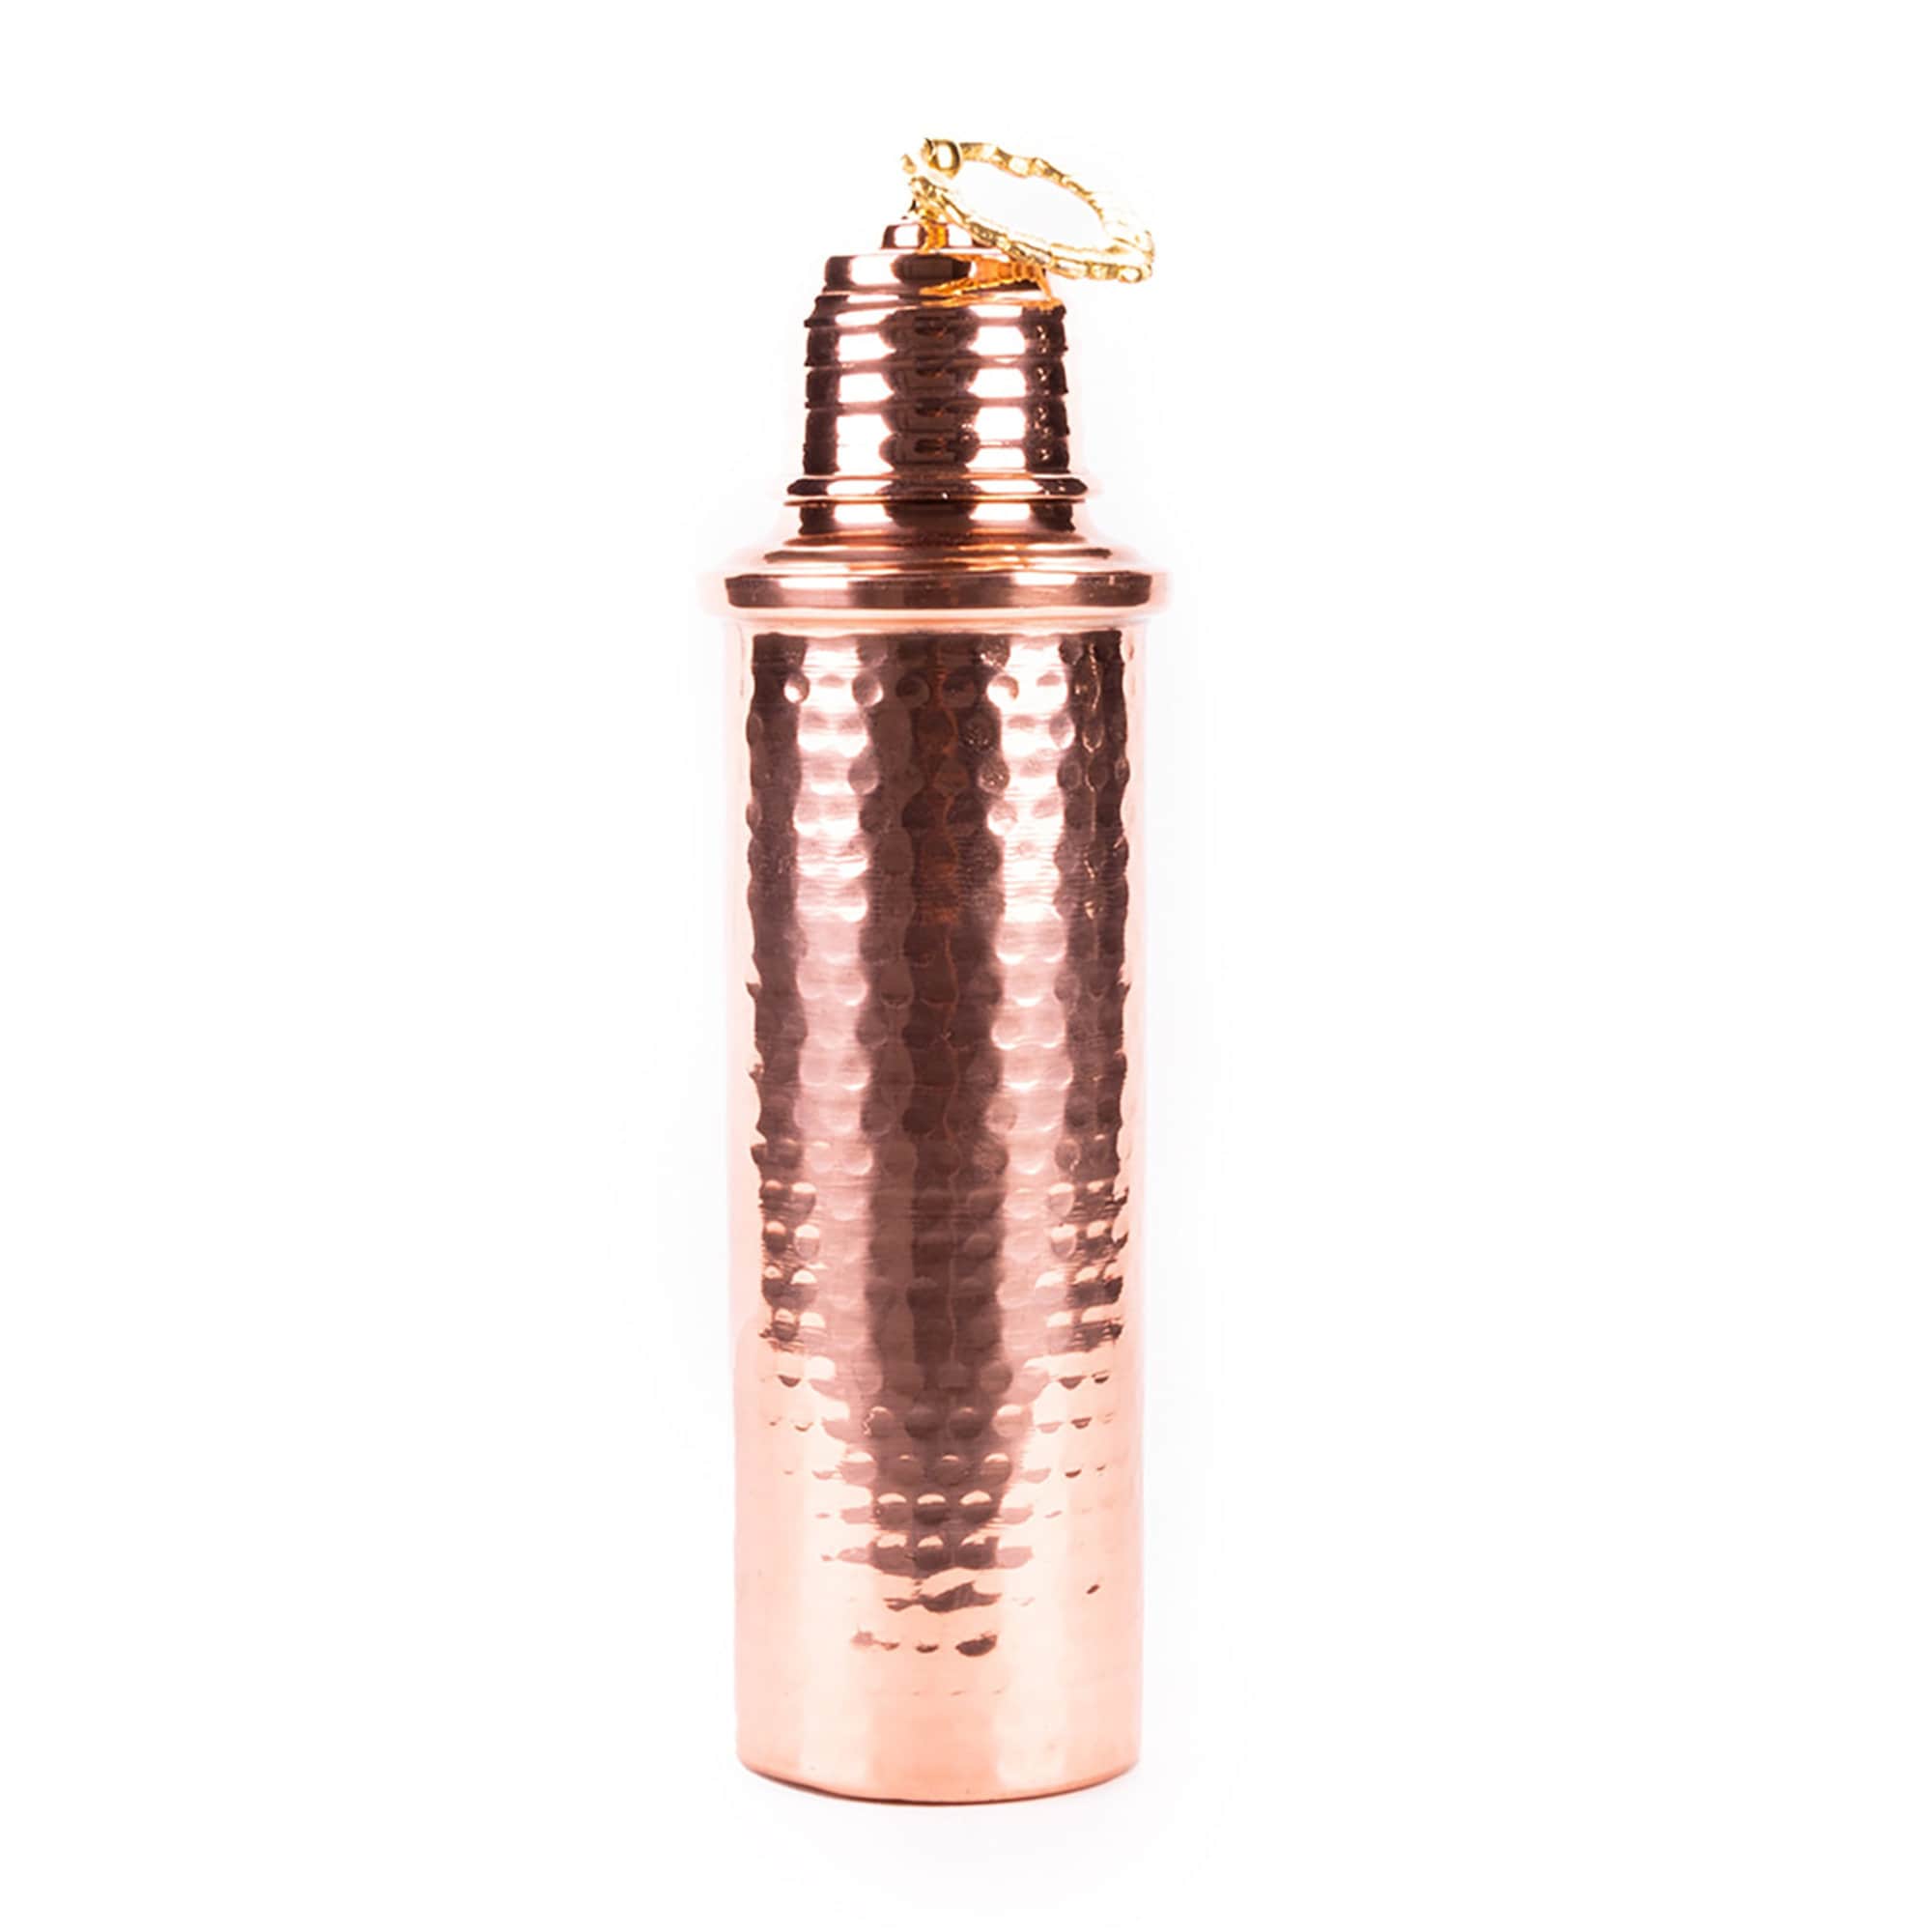 Hammered Pure Copper Water Bottle 750 Ml Premium Quality by 